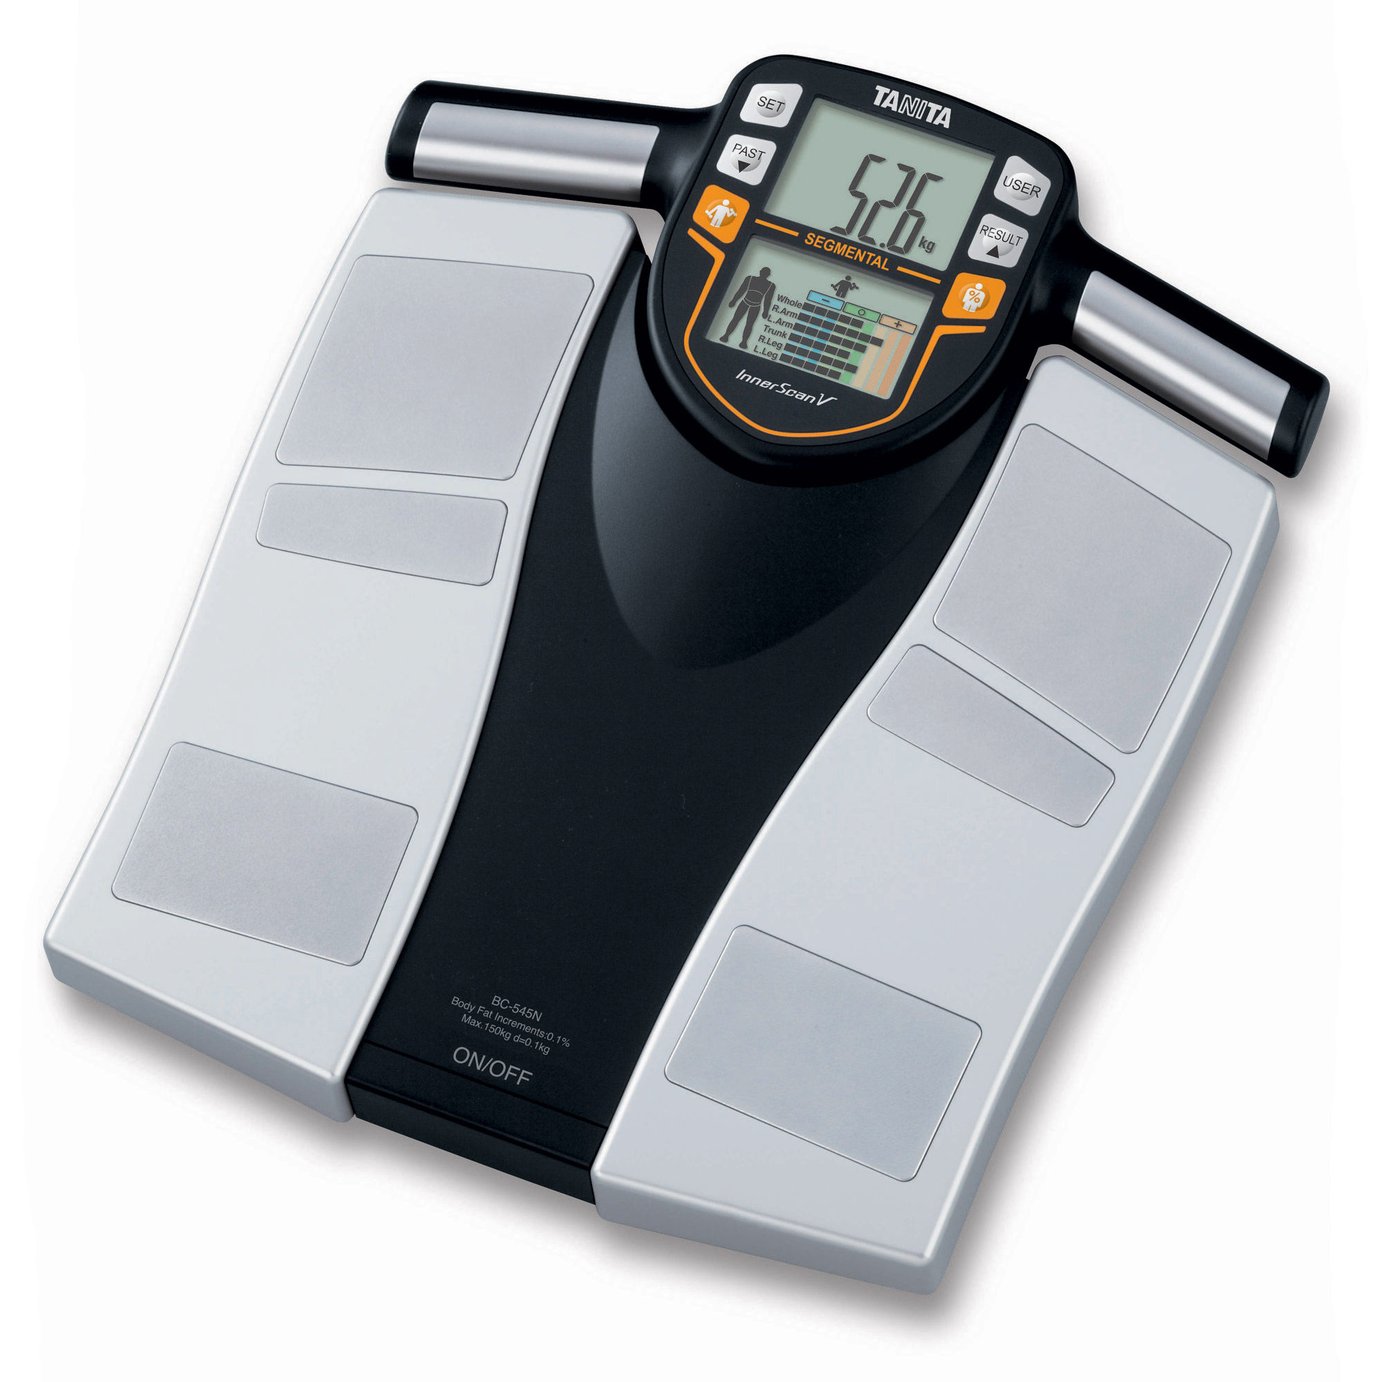 Tanita BC545N Body Composition Scales Review